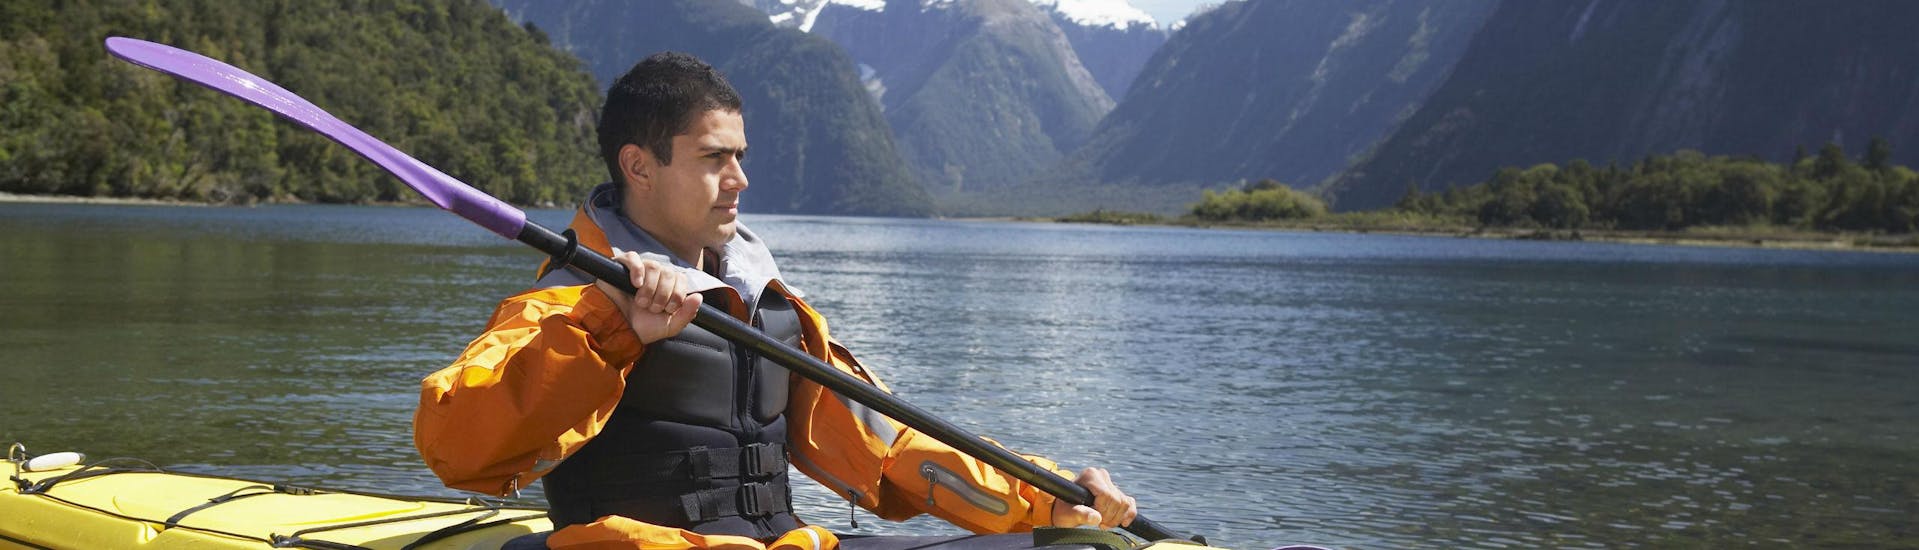 A young man is kayaking in Milford Sound and enjoying the spectacular scenery of the fjord.